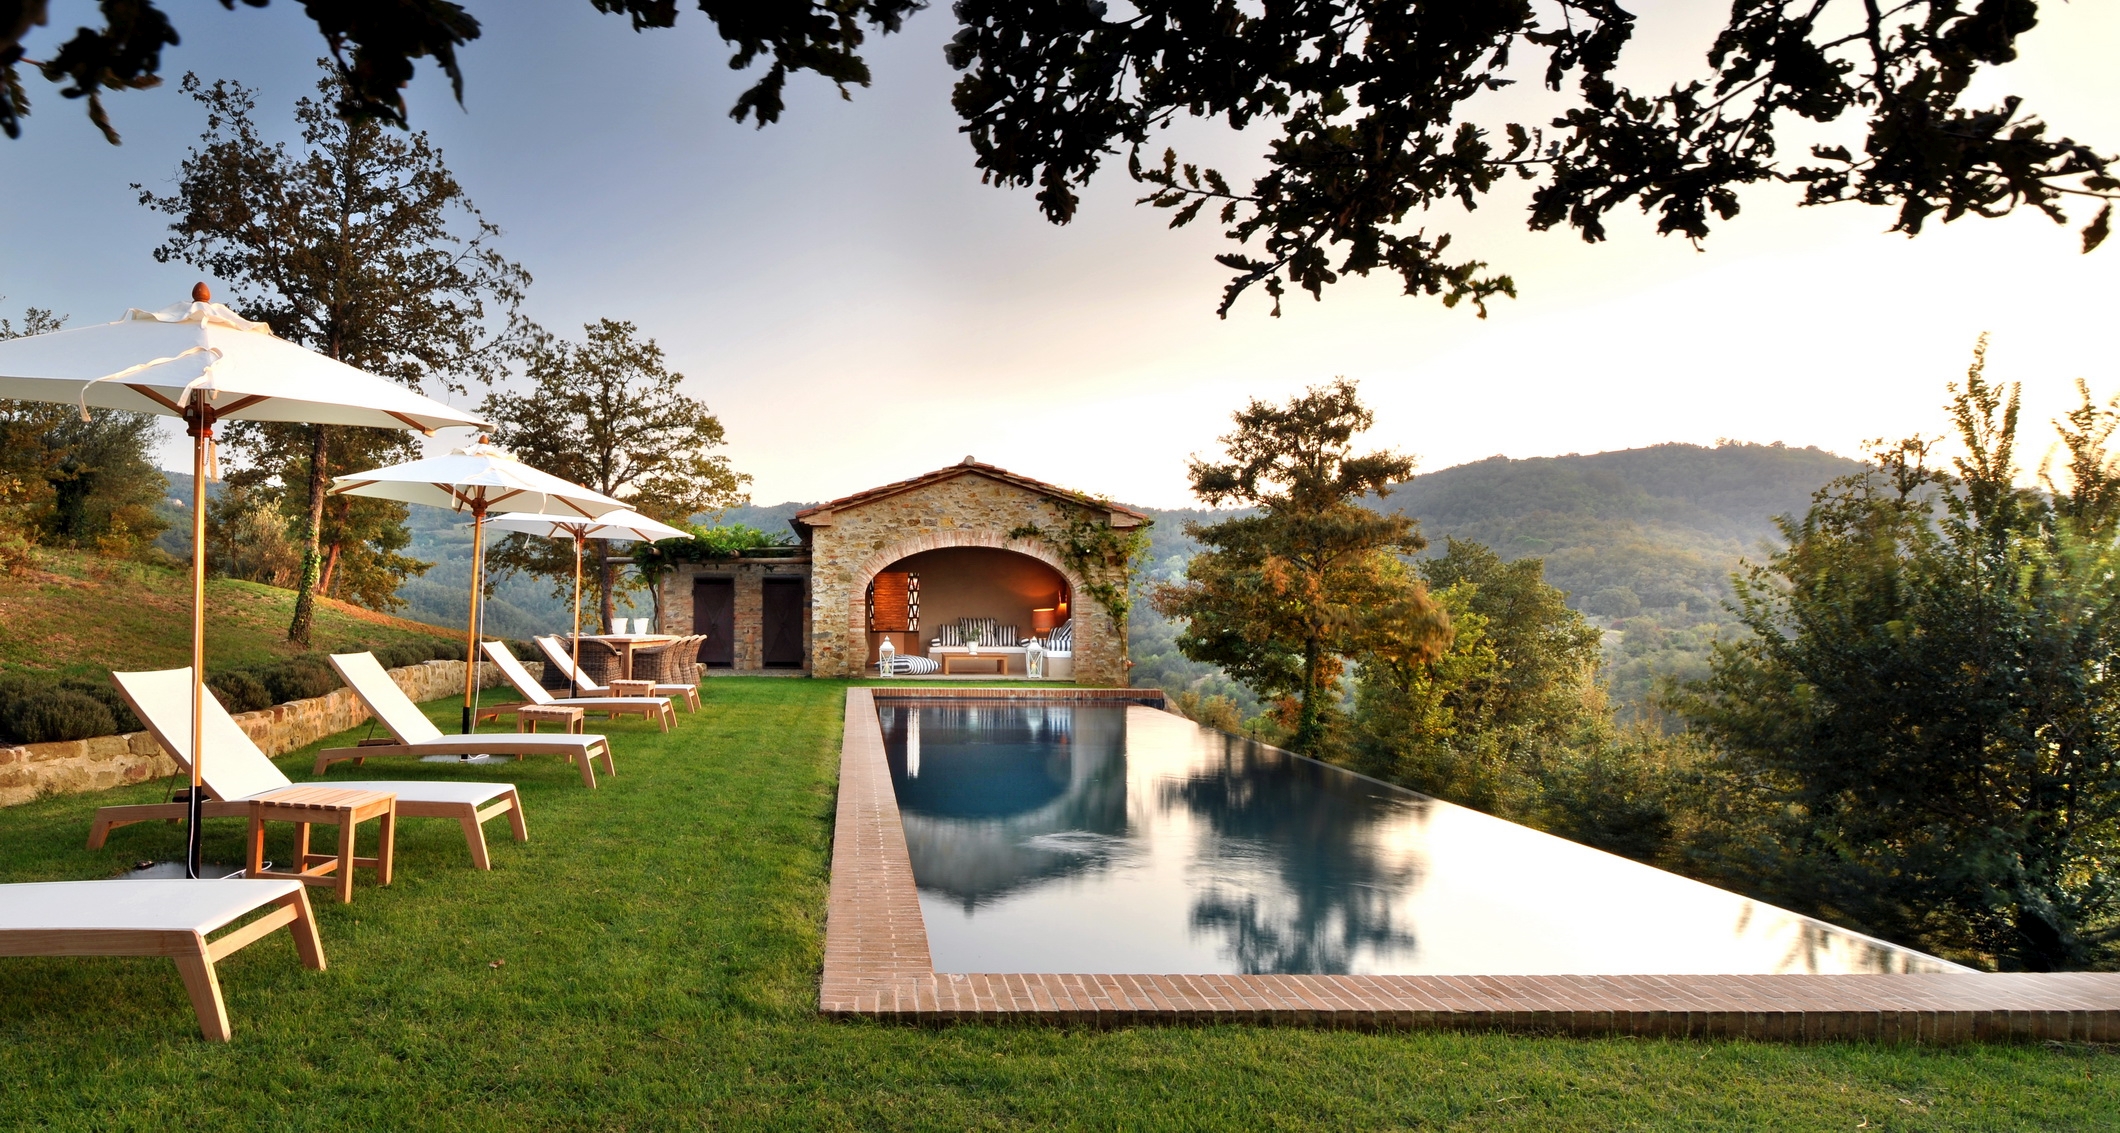 Infinity pool and facade of Villa Spinaltermine, Umbria